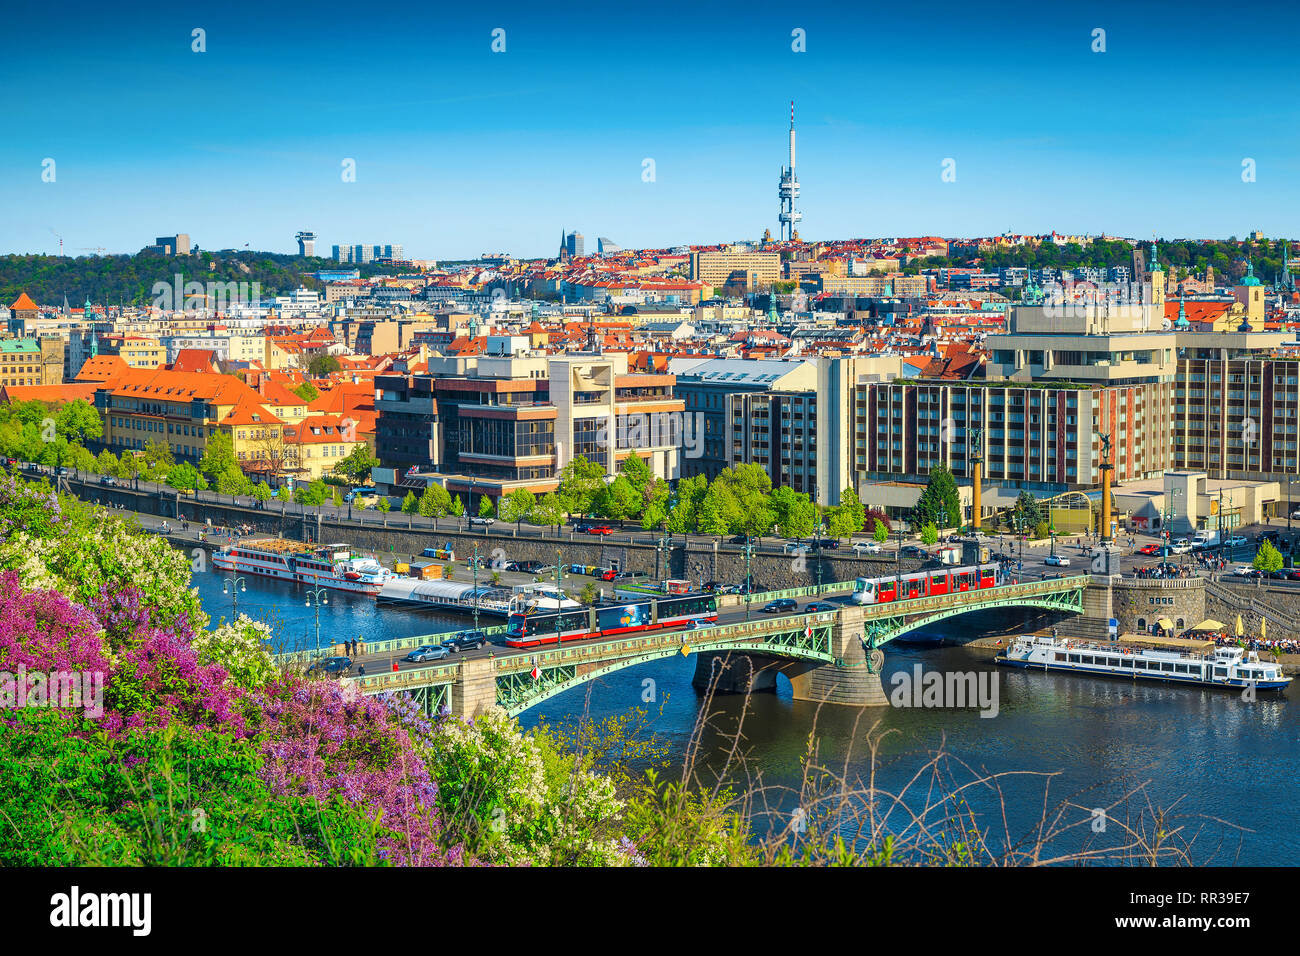 Wonderful touristic and travel destination. Vltava river and bridge with red trams. City center with colorful spring flowers in public park, Prague, C Stock Photo